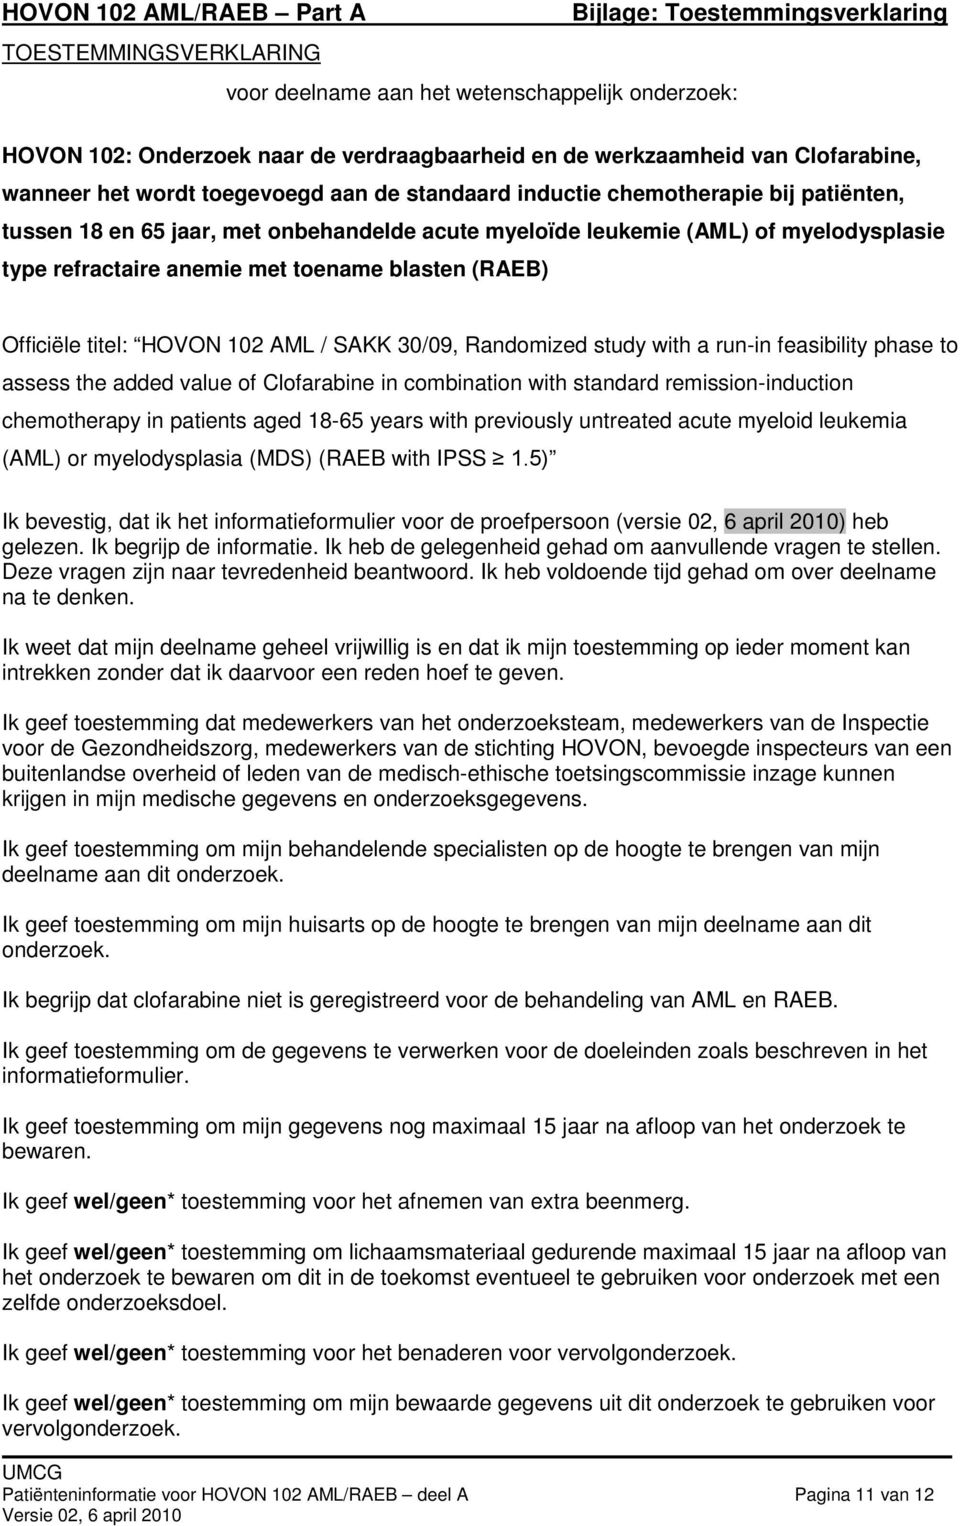 blasten (RAEB) Officiële titel: HOVON 102 AML / SAKK 30/09, Randomized study with a run-in feasibility phase to assess the added value of Clofarabine in combination with standard remission-induction